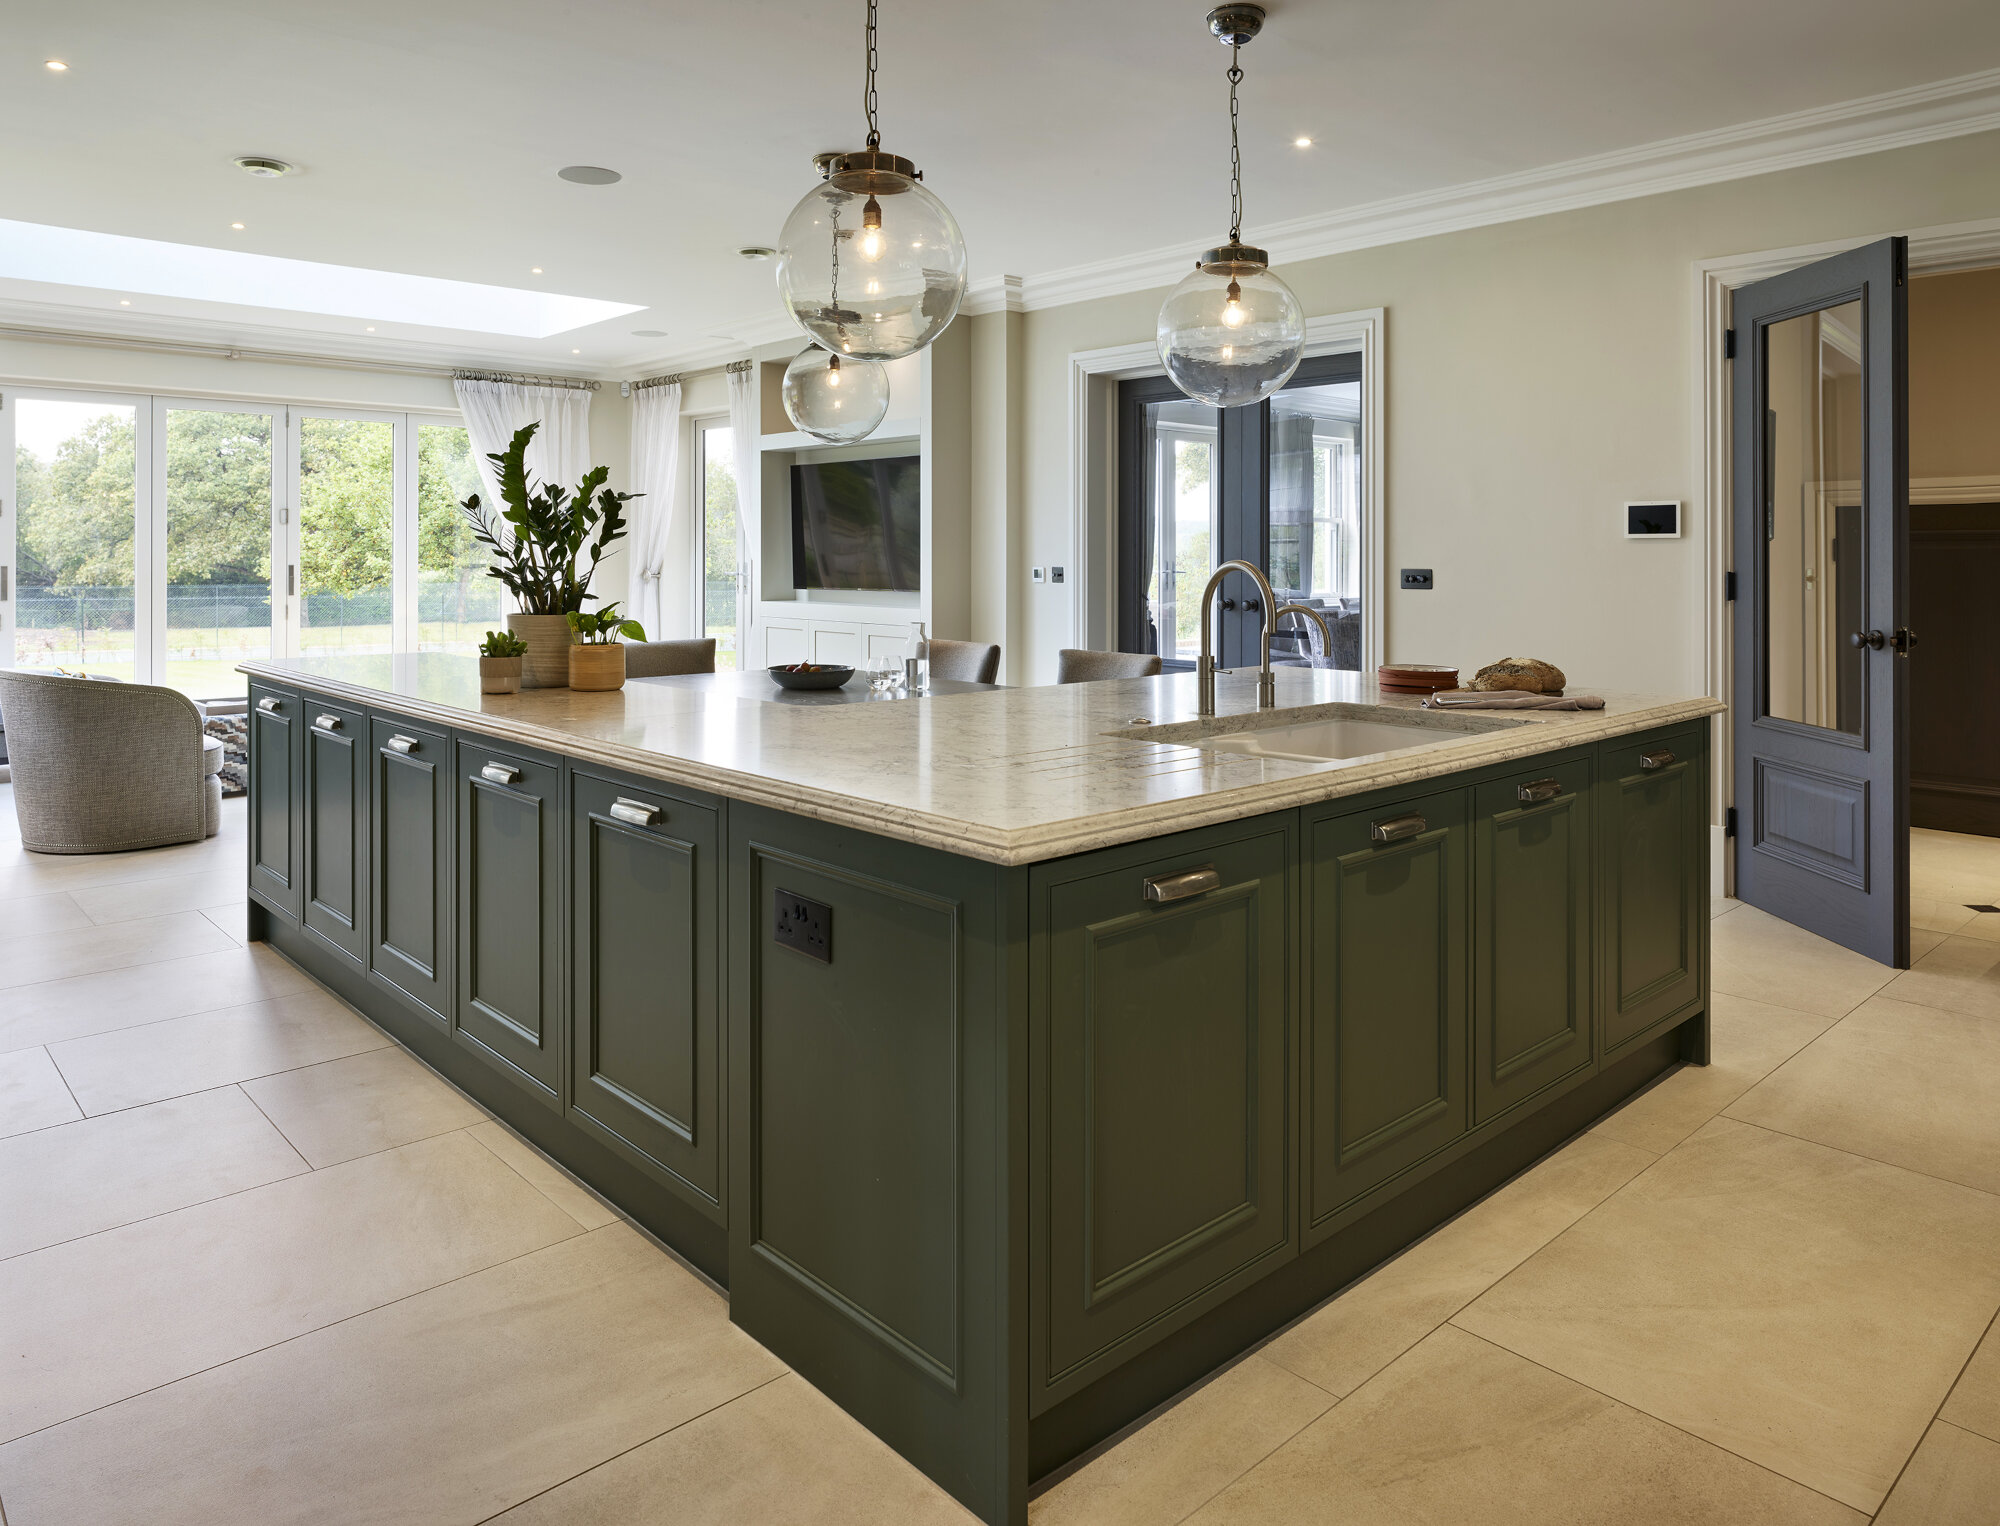 High End traditional Kitchens In Swadlincote